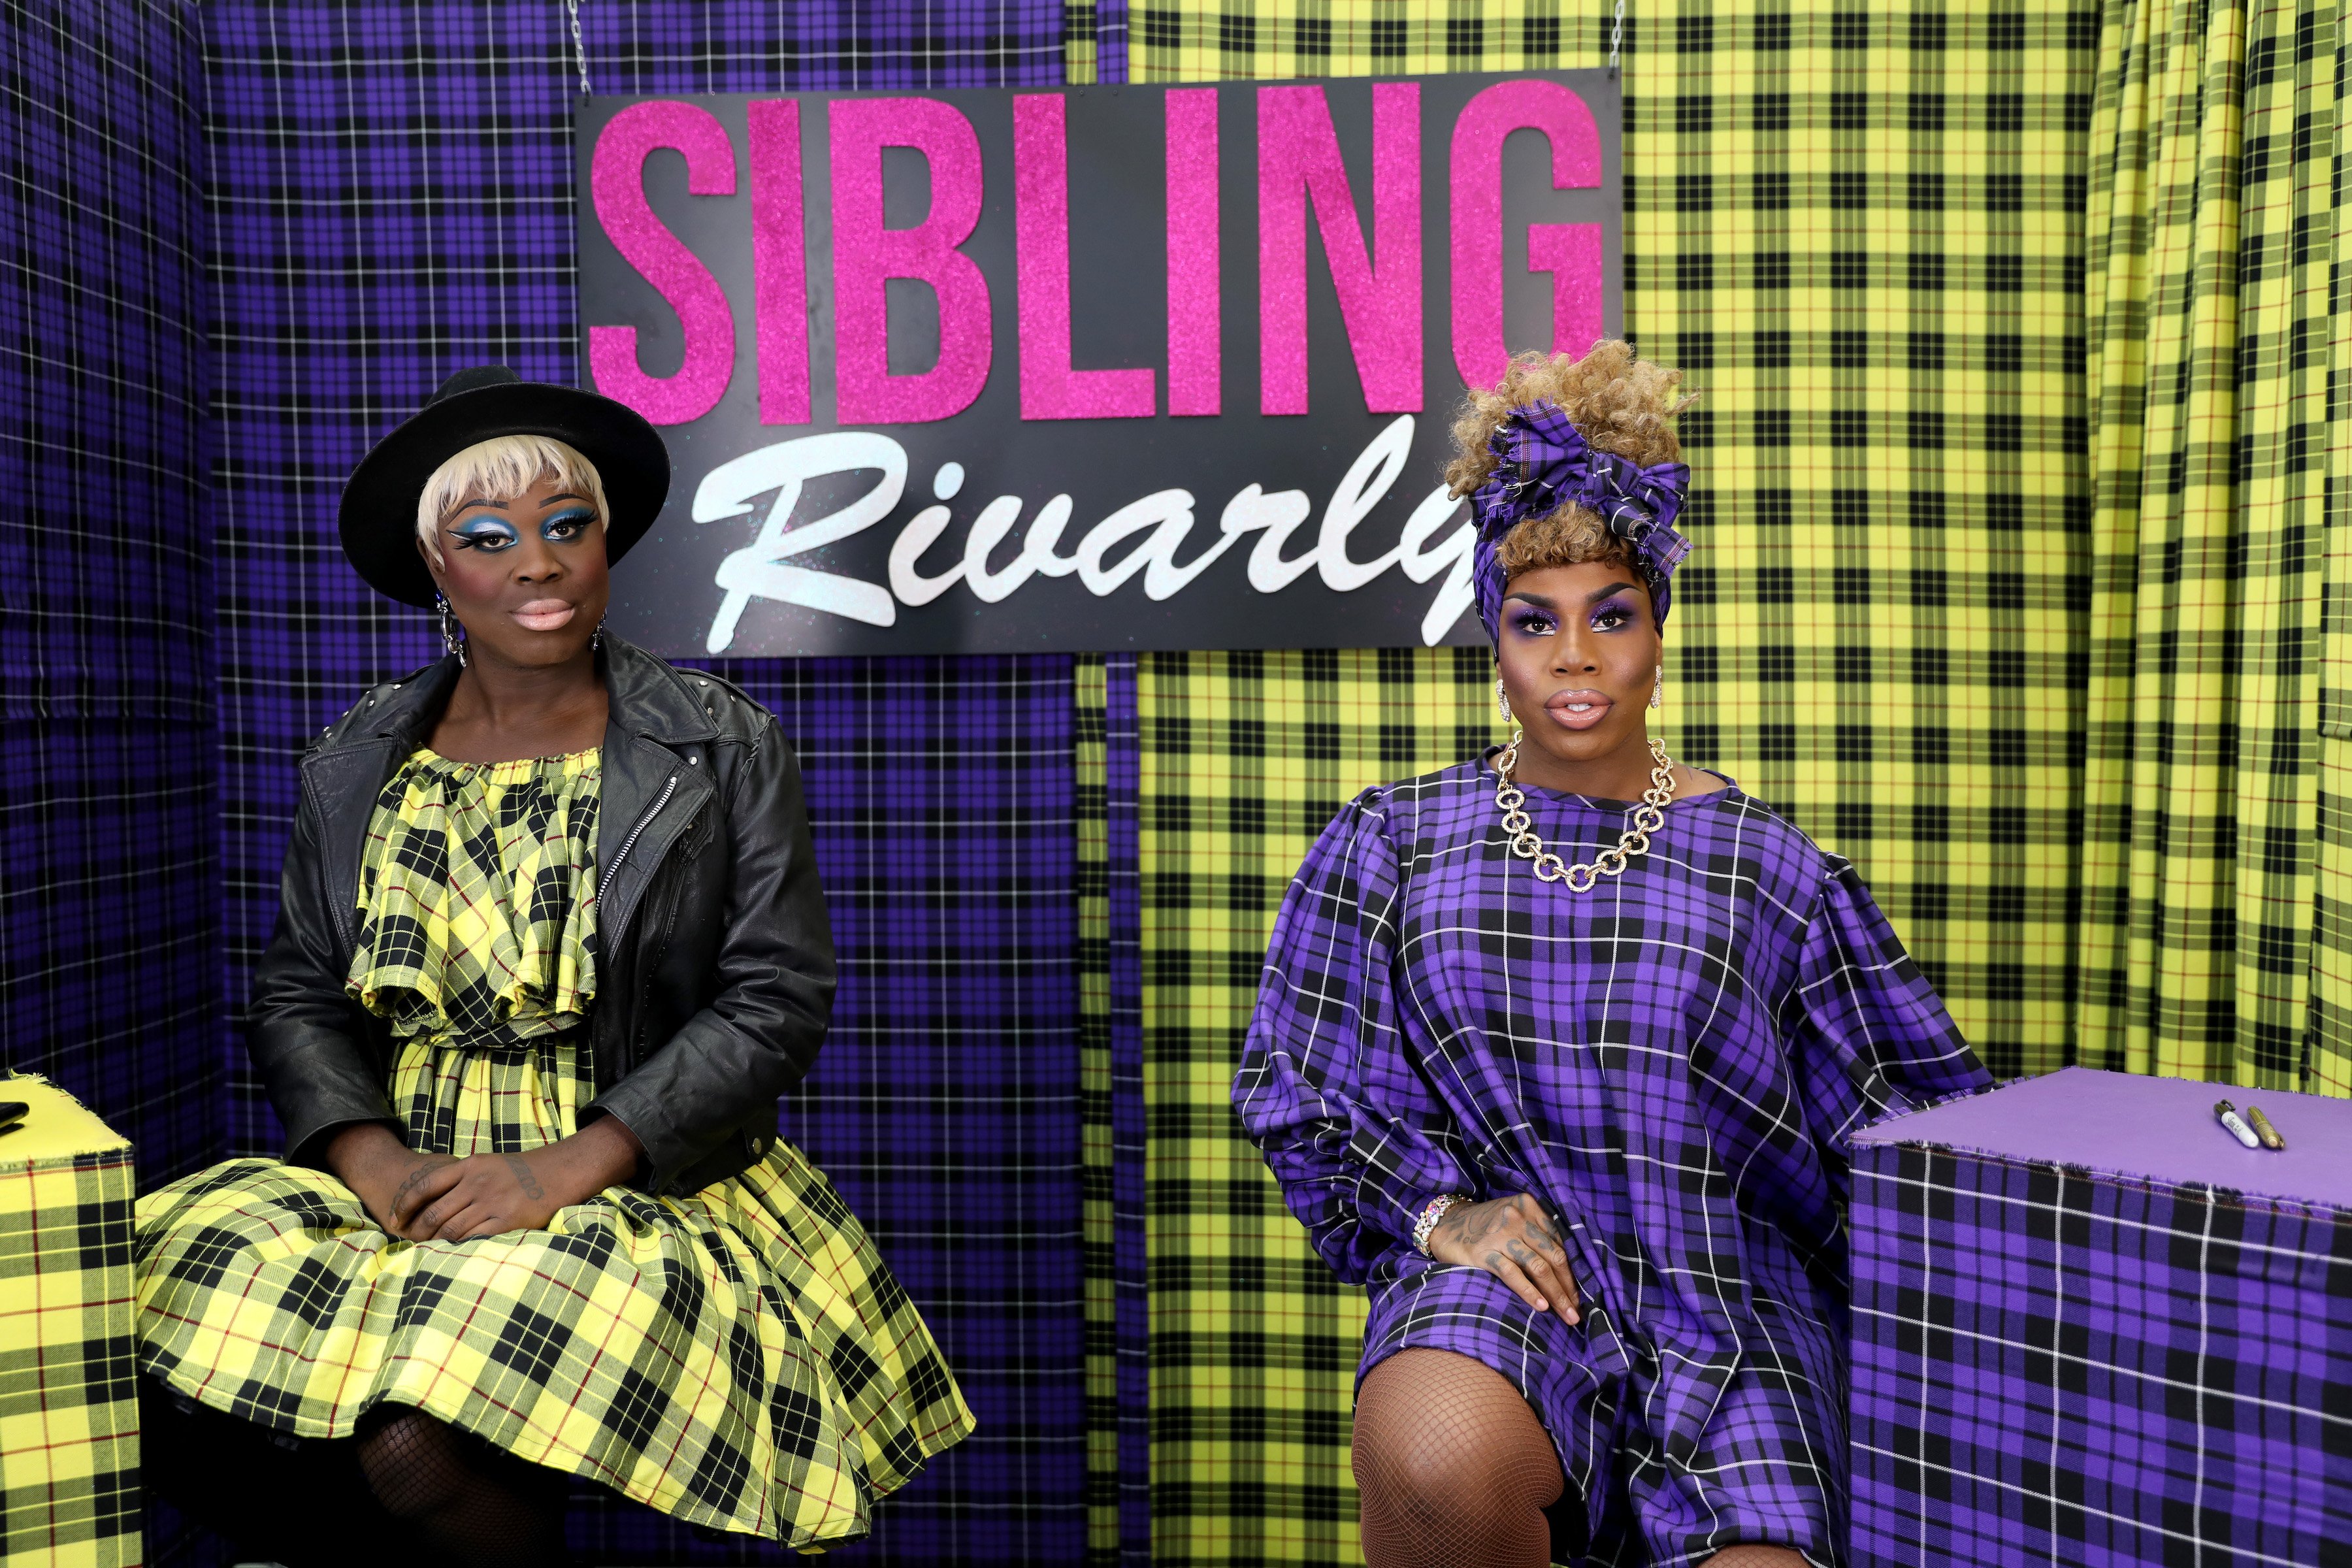 Sibling Rivalry aka Bob the Drag Queen and Monét X Change attend RuPaul's DragCon UK